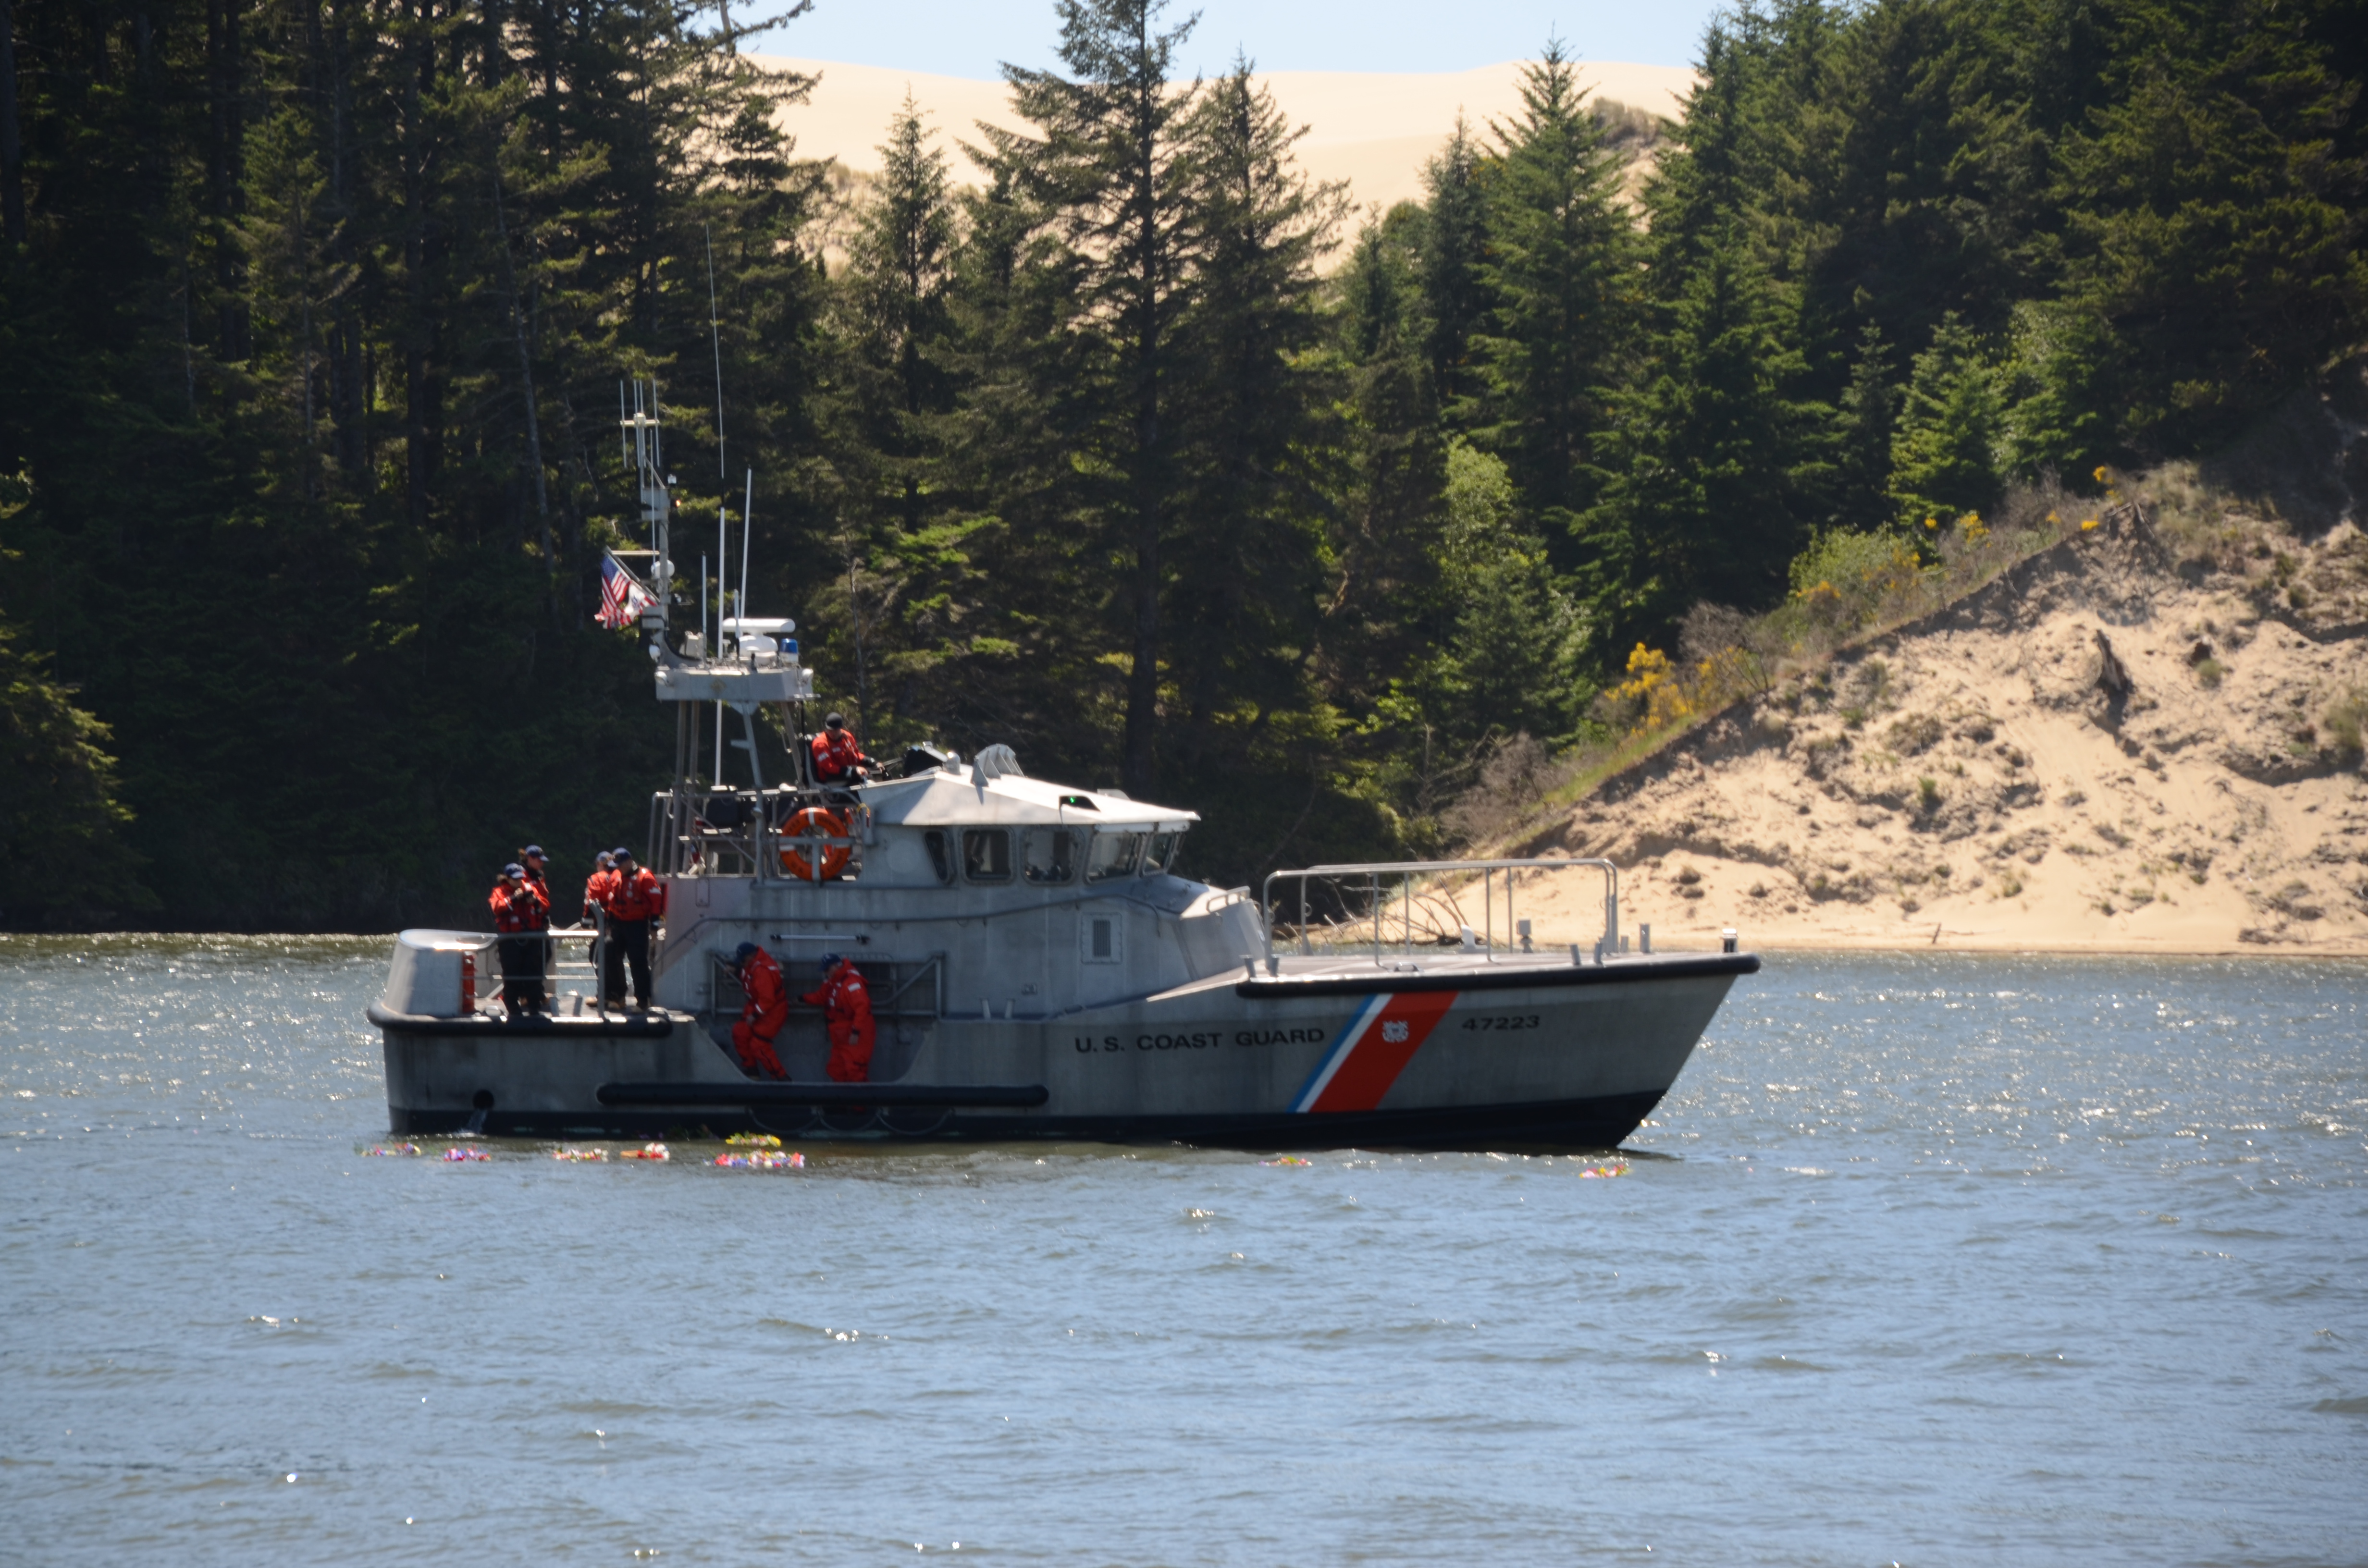 Coast Guard Vessel Laying Wreaths on Memorial Day 2018